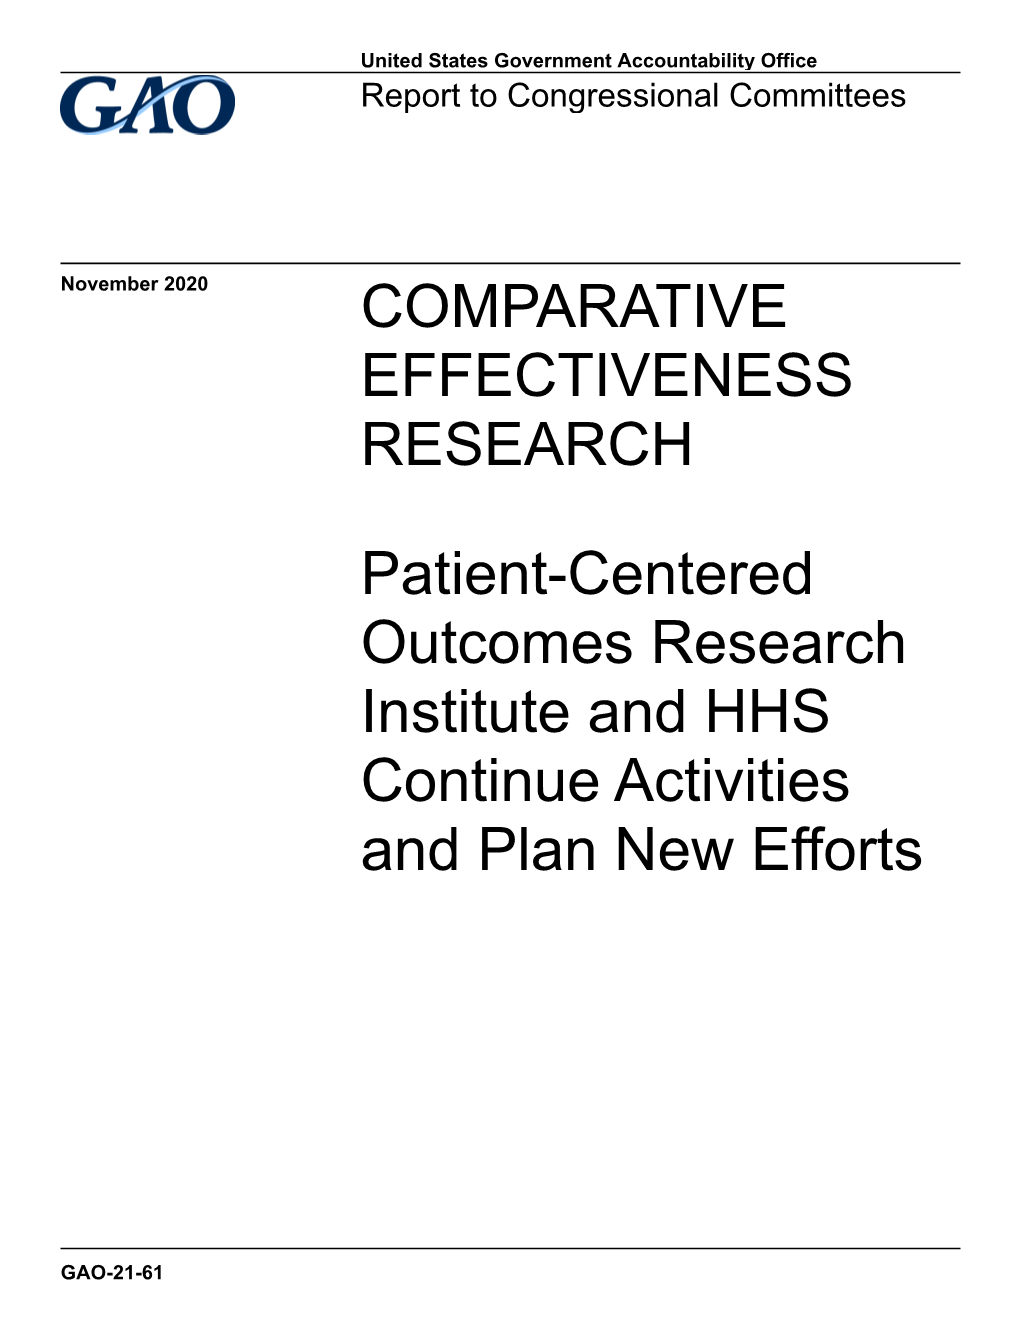 Gao-21-61, Comparative Effectiveness Research